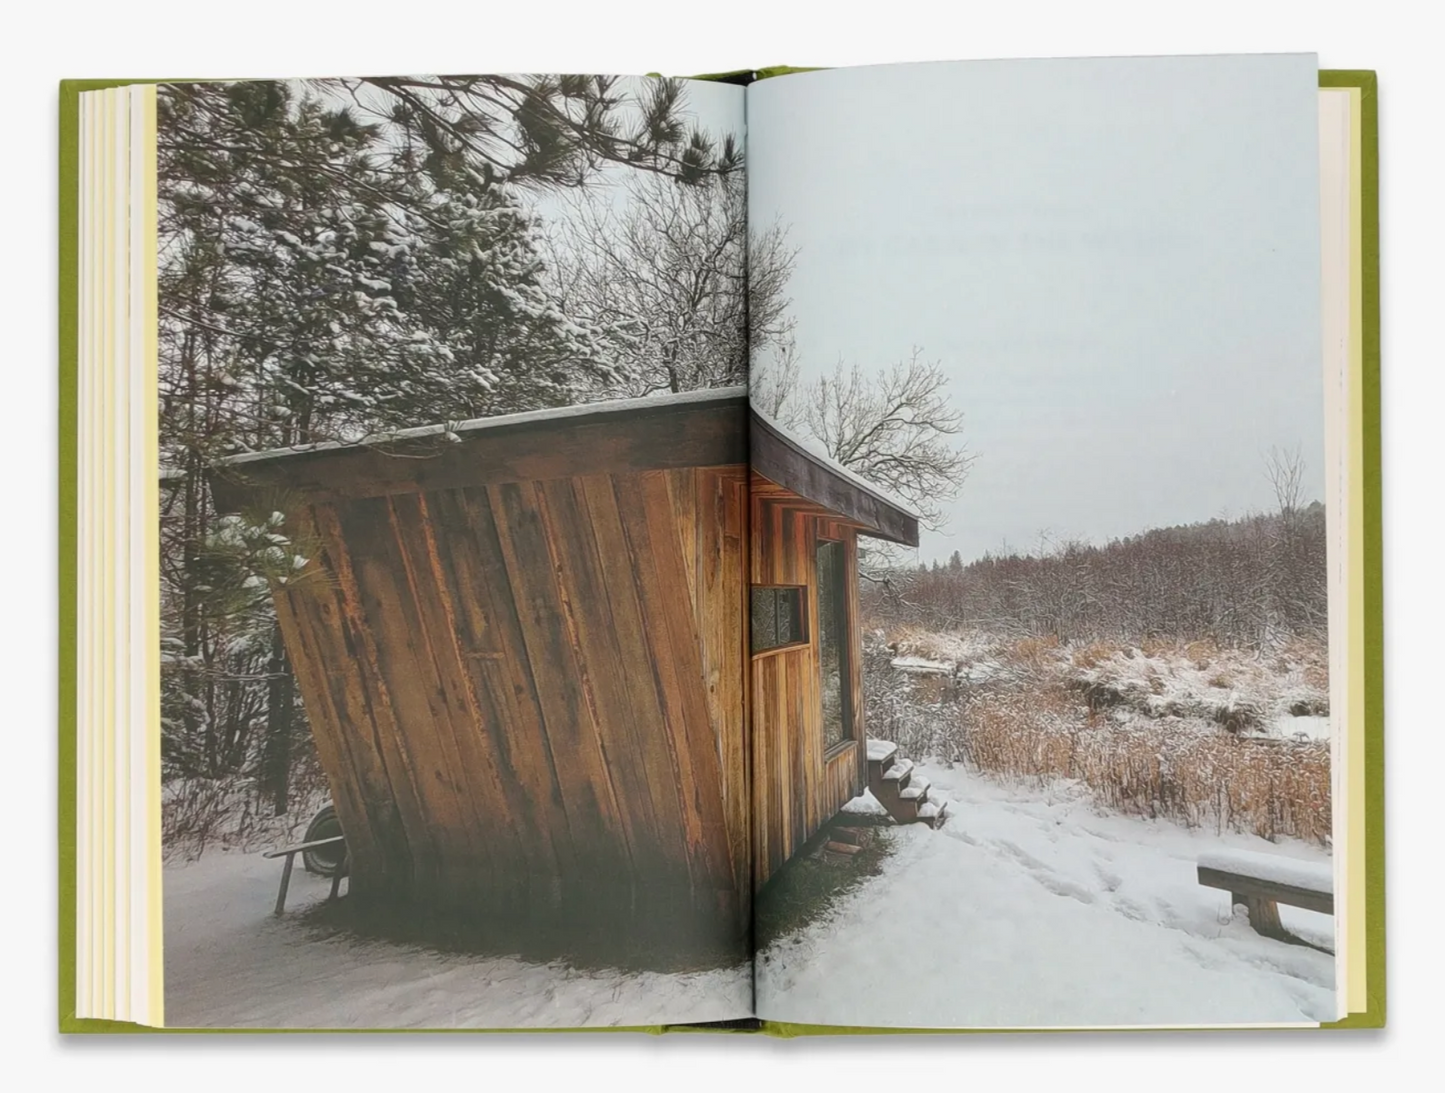 Cabin How to Build a Retreat in the Wilderness and Learn to Live With Nature